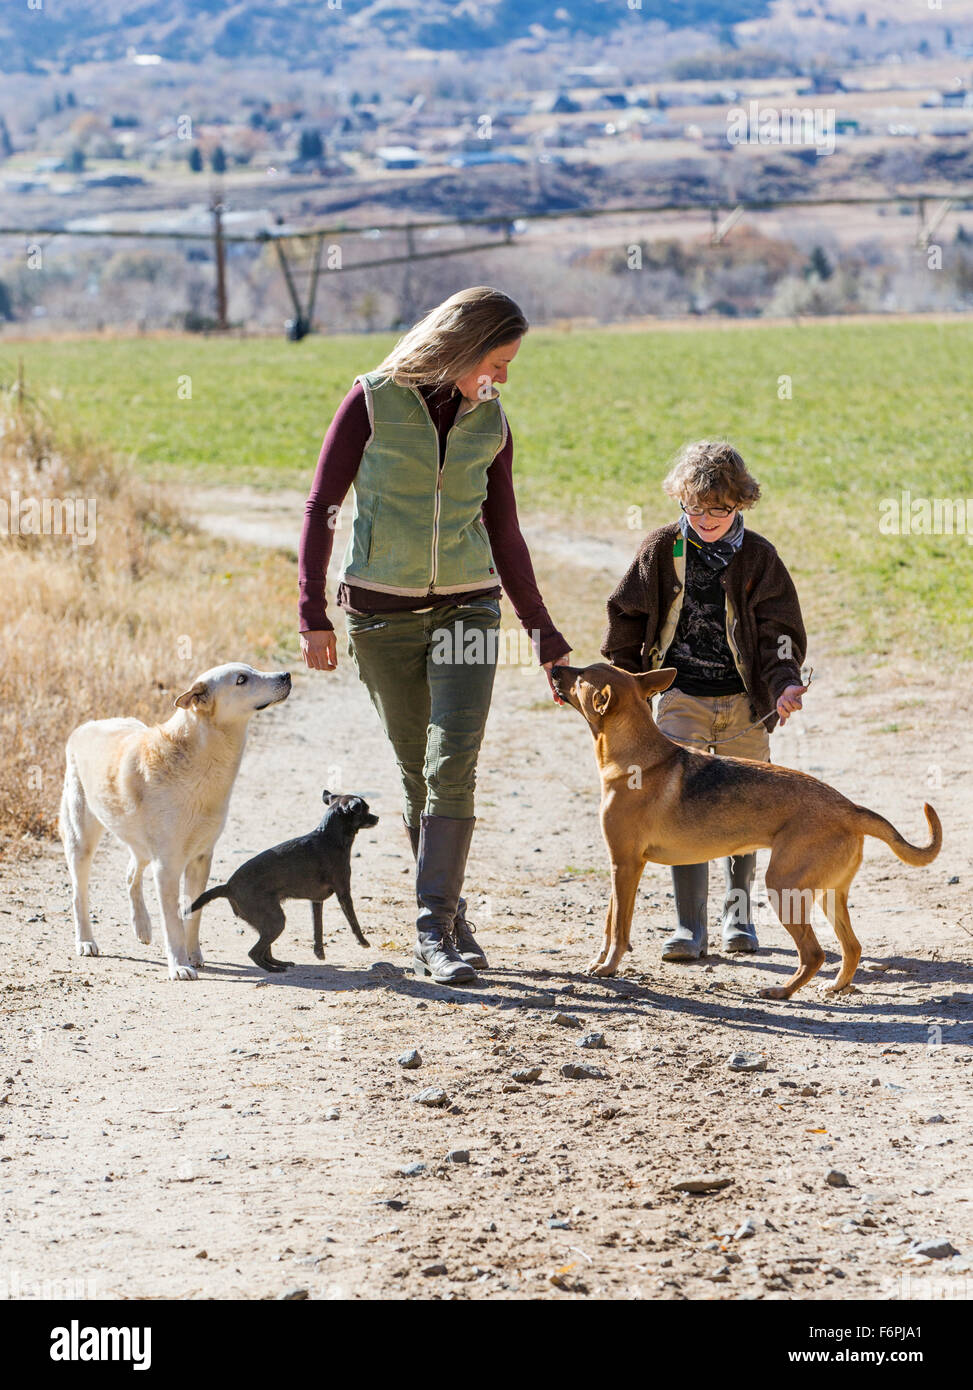 Attractive mother; young son and pet dogs walking along dirt path on ranch Stock Photo